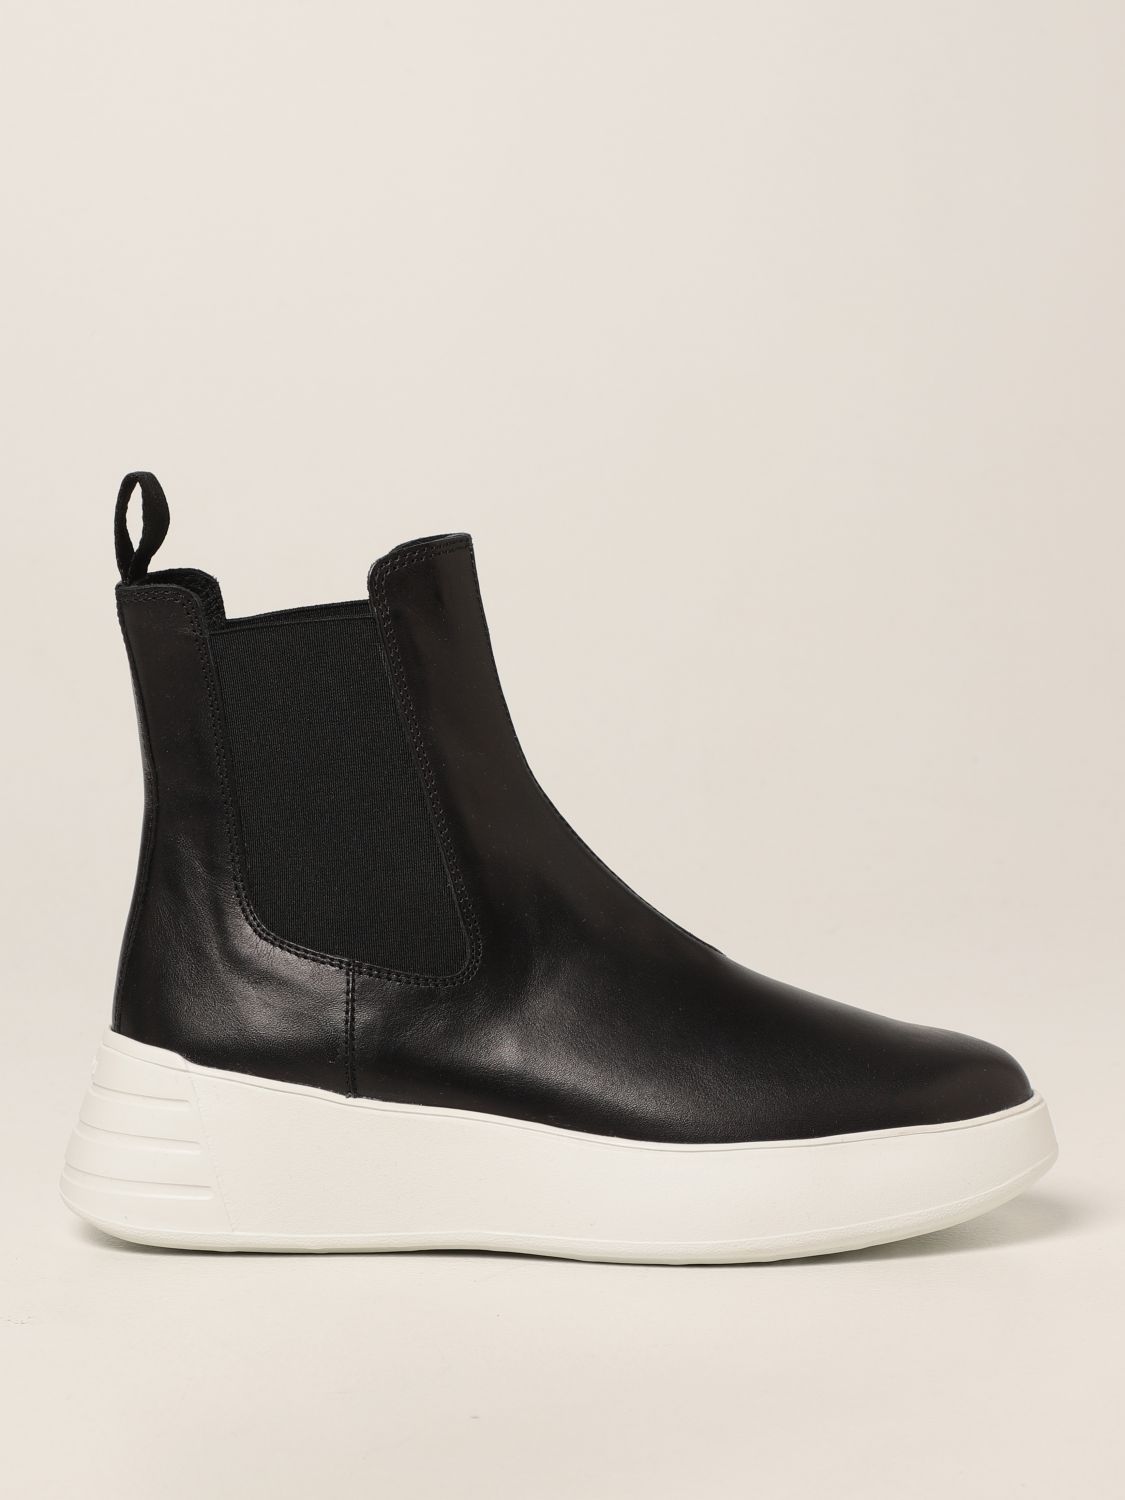 HOGAN: Rebel H562 Chelsea boots in leather - Black | Flat Ankle Boots ...